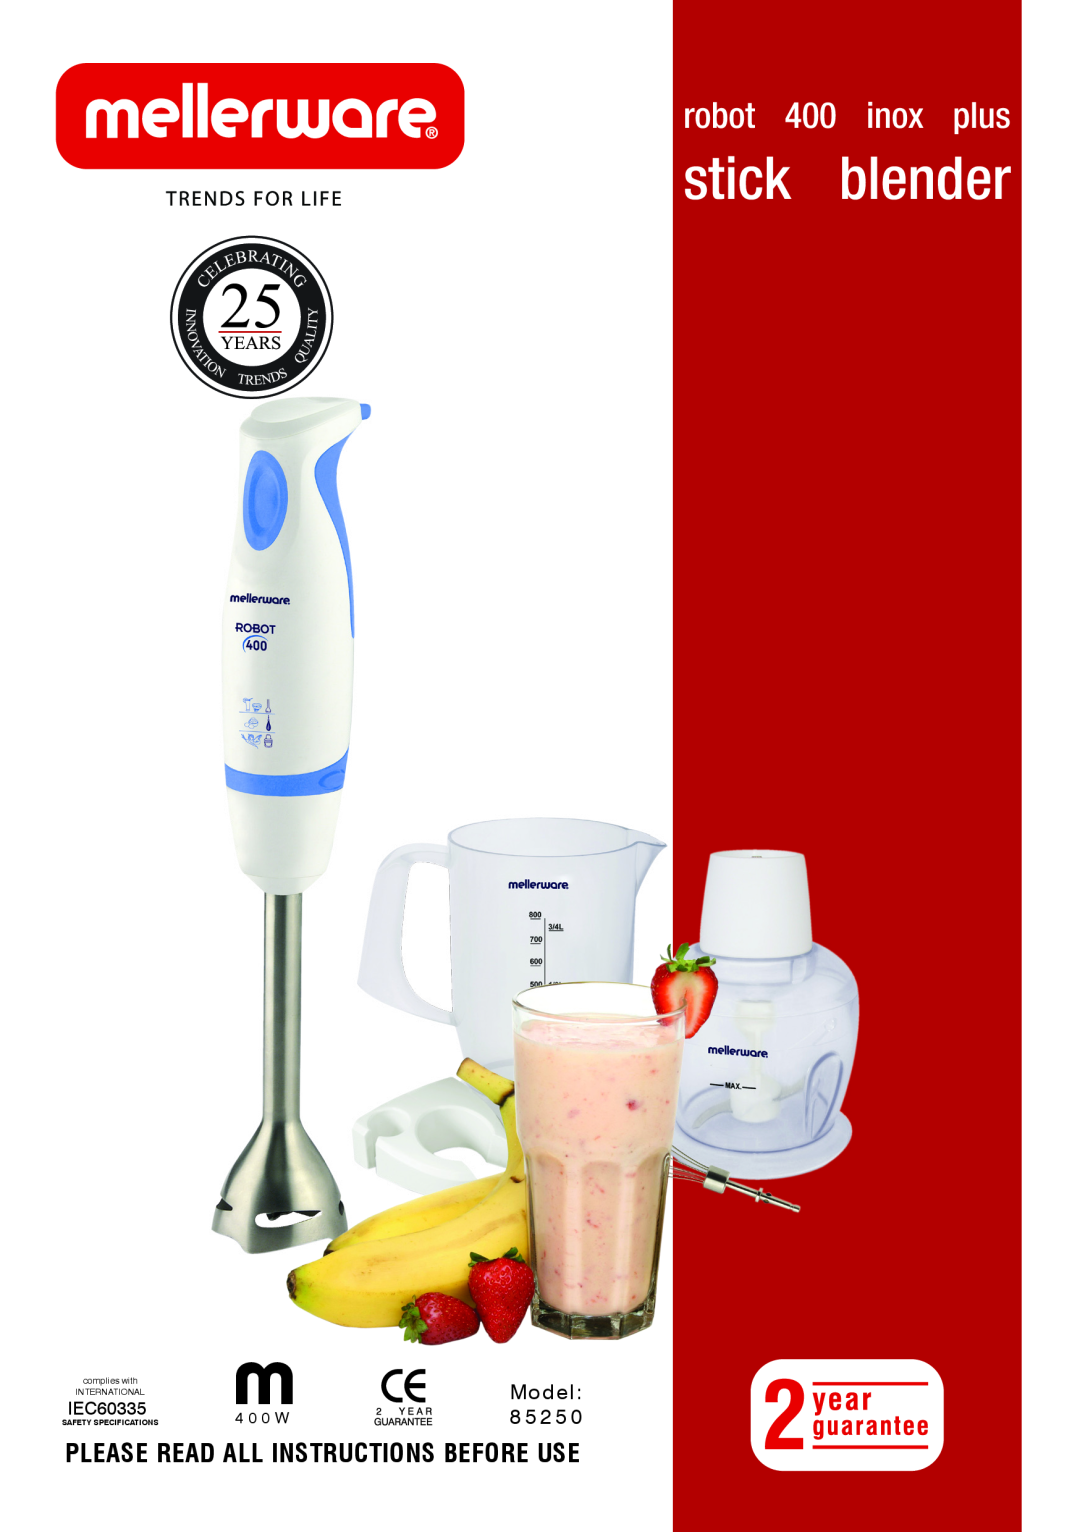 Mellerware 85250 specifications stick blender, robot 400 inox plus, Please Read All Instructions Before Use, IEC60335 